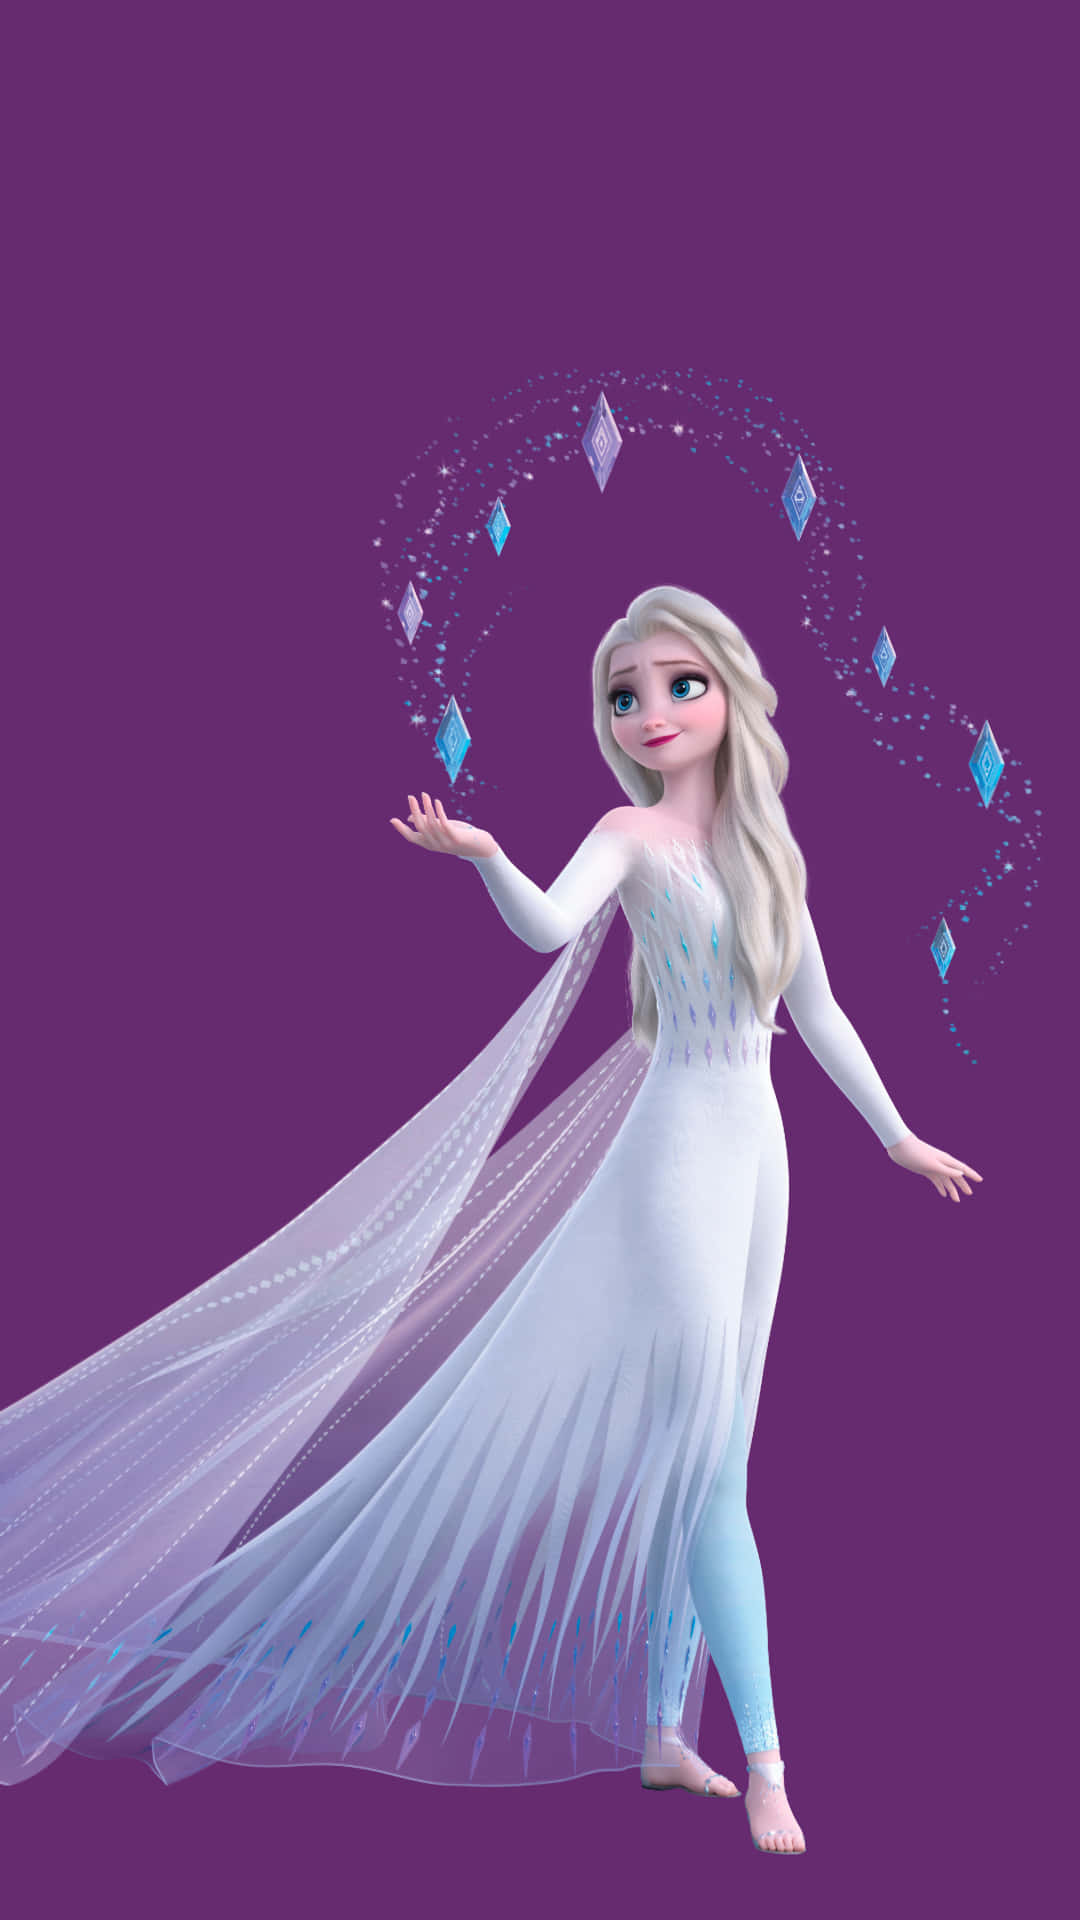 Image  Elsa wears a beautiful white dress for the first time in Disney's Frozen 2 Wallpaper